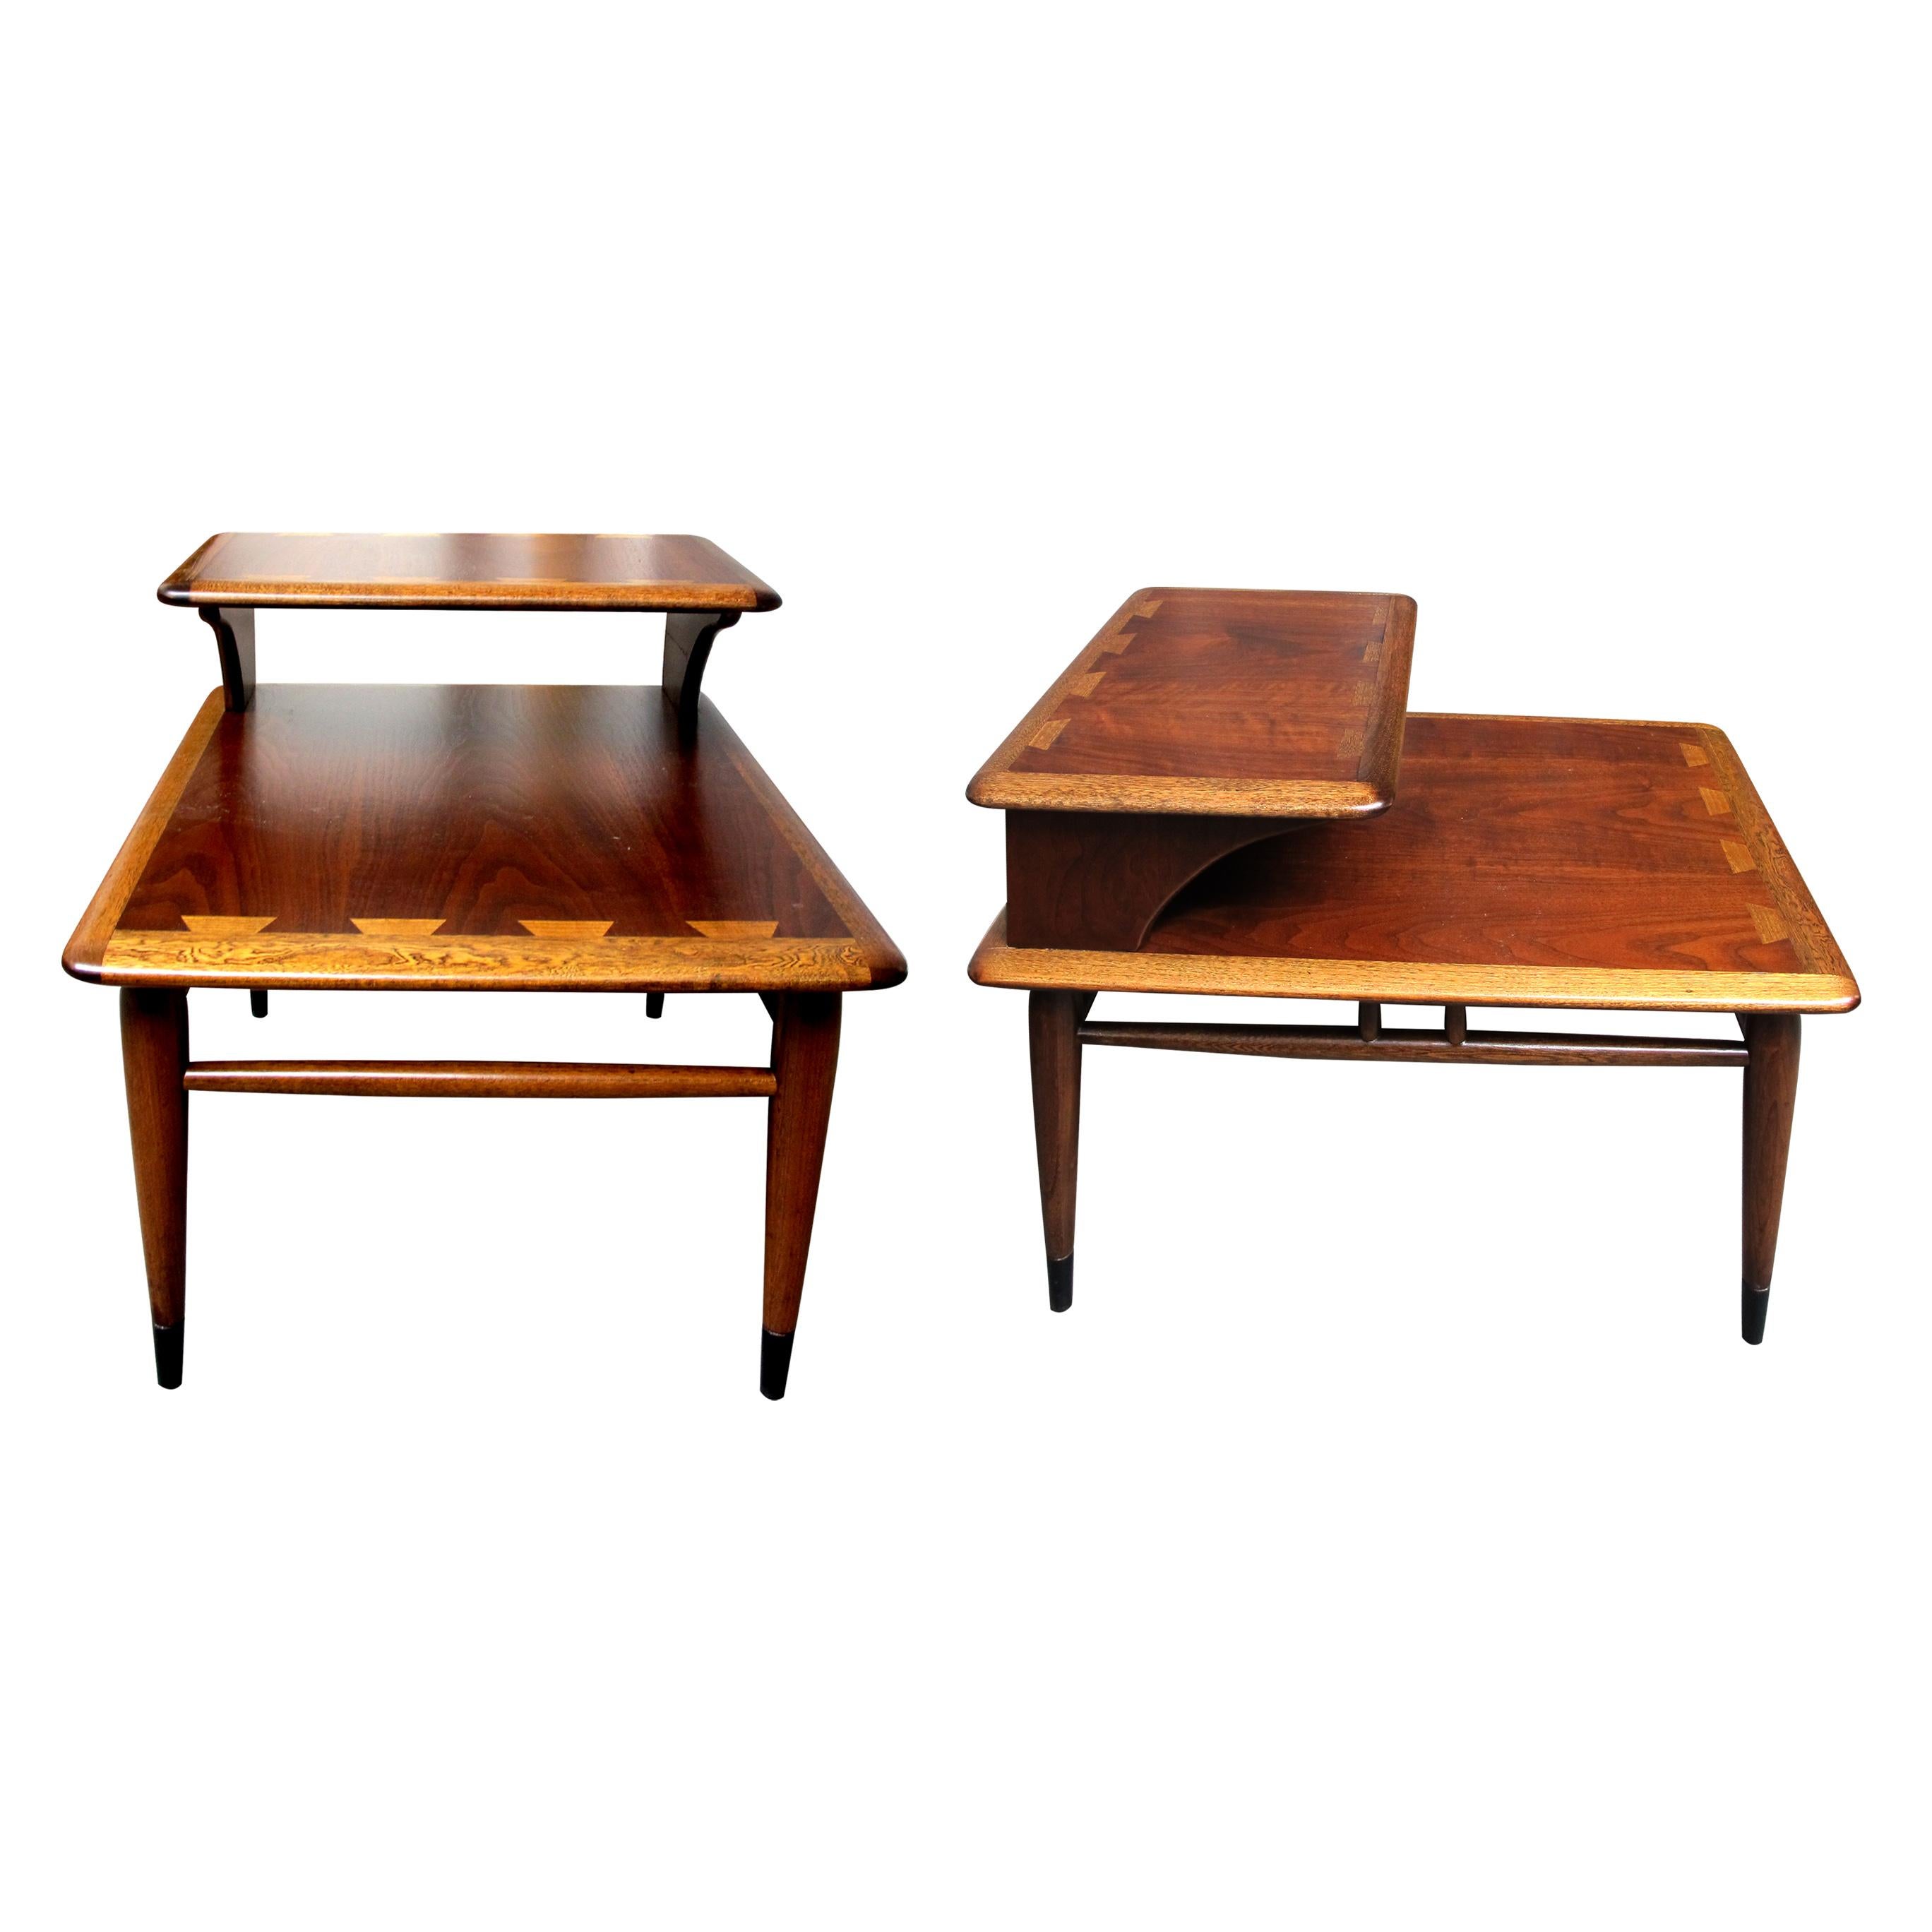 Mid-Century Modern 1960s Pair of Modernist Two Tiers Walnut Side Tables, American by LANE